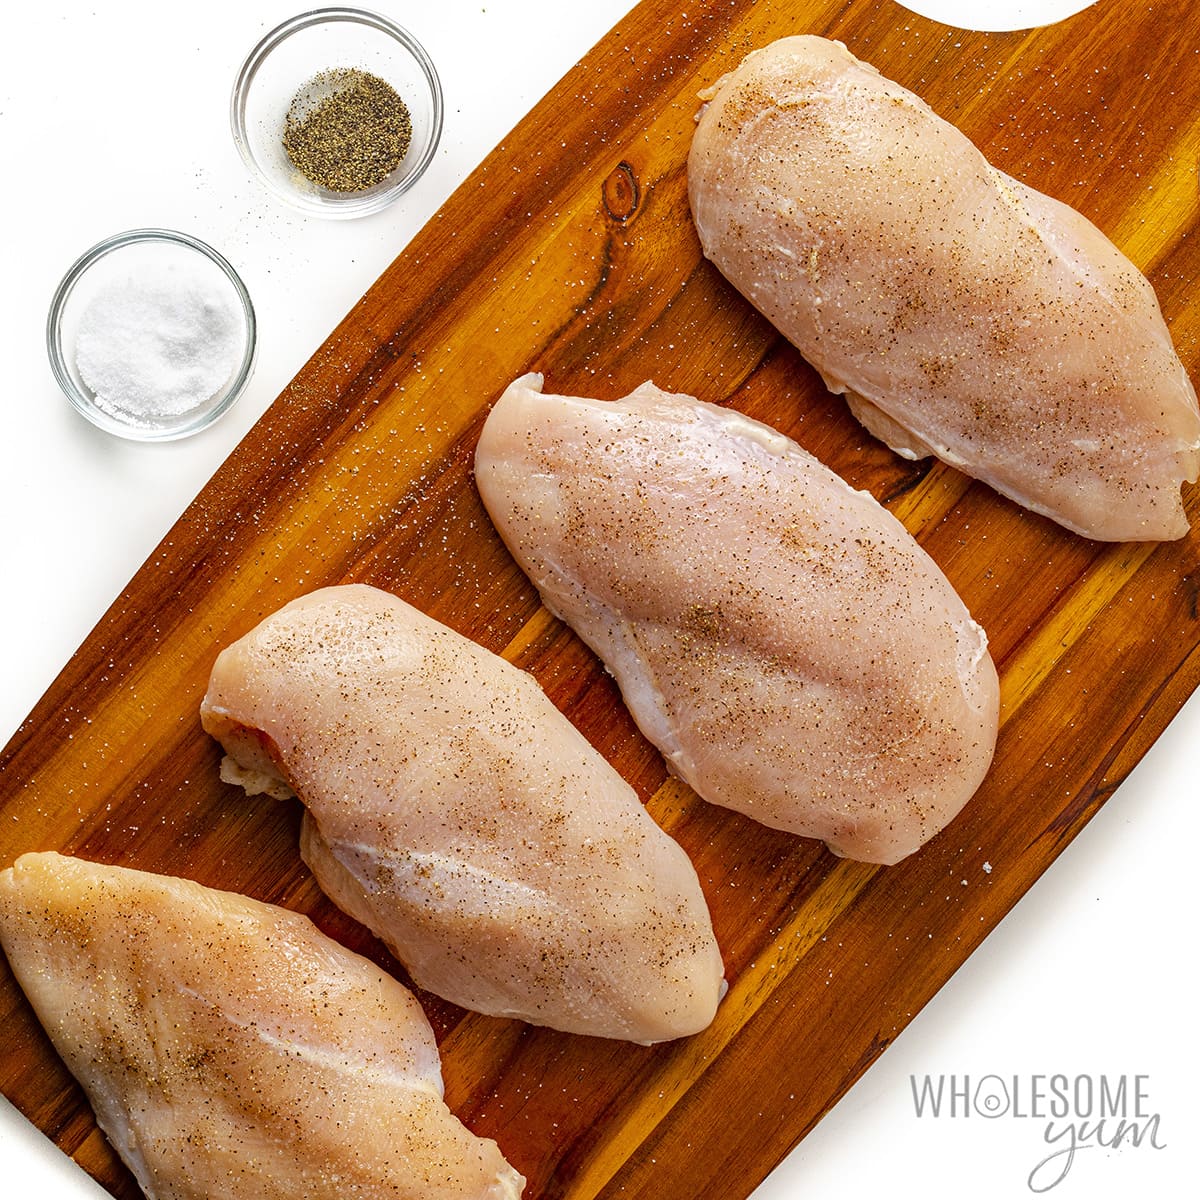 Chicken patted dry and seasoned with salt and pepper.